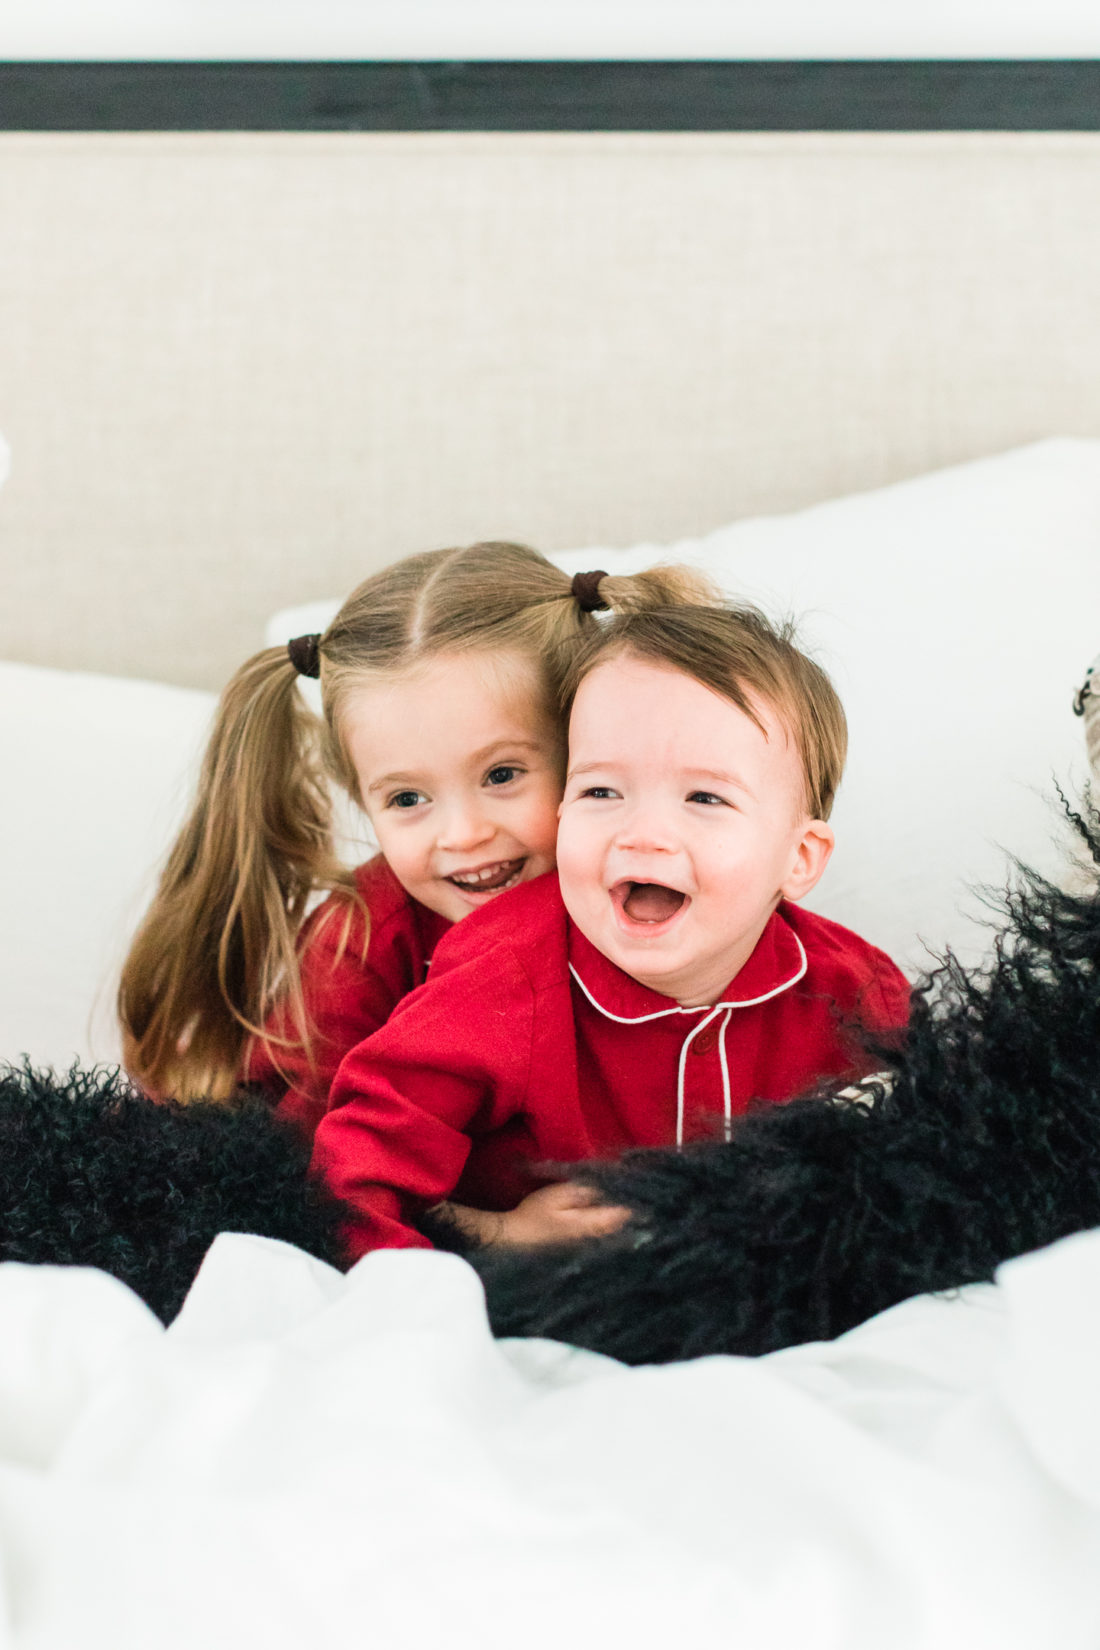 Marlowe Martino laughs and wrestles with little brother Major in the master bedroom of their Connecticut home